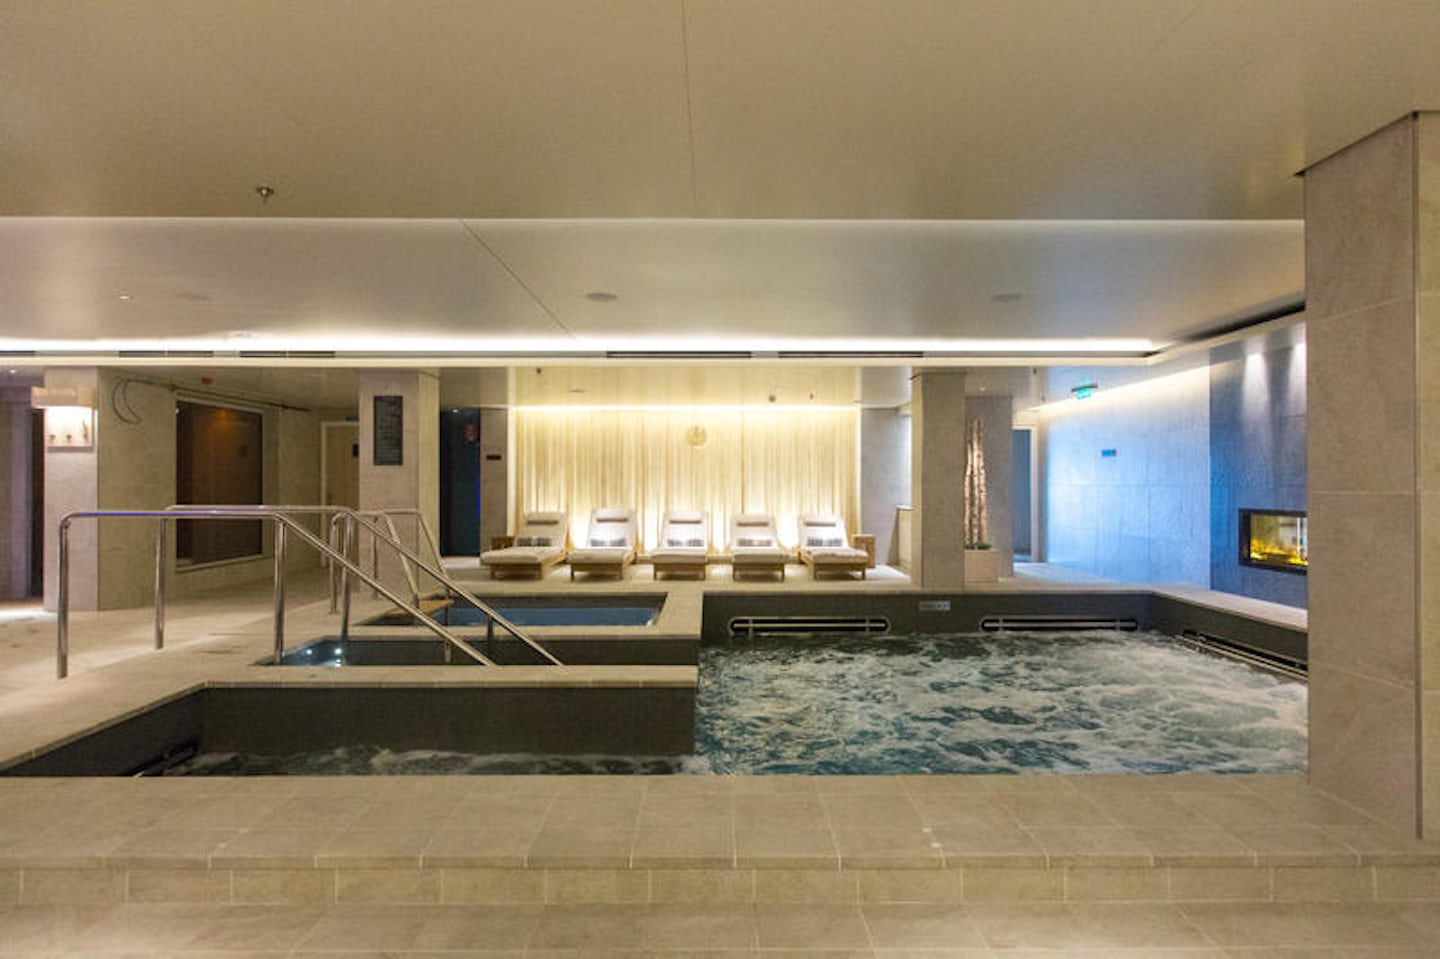 Vitality Pool & Hot Tub in the Spa on Viking Orion